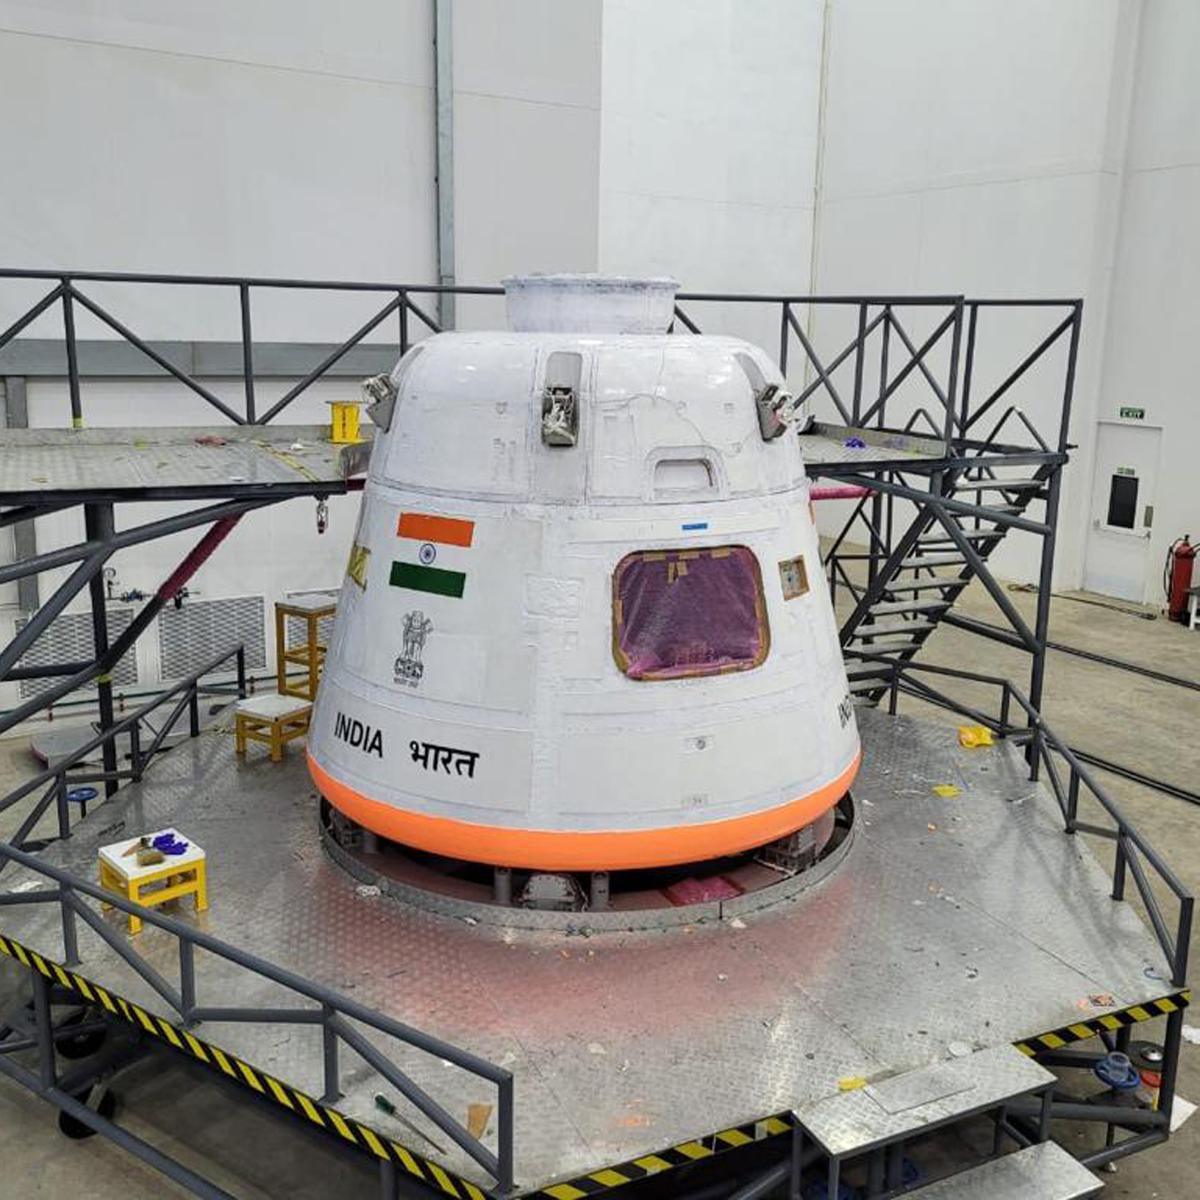 A view of the crew module.